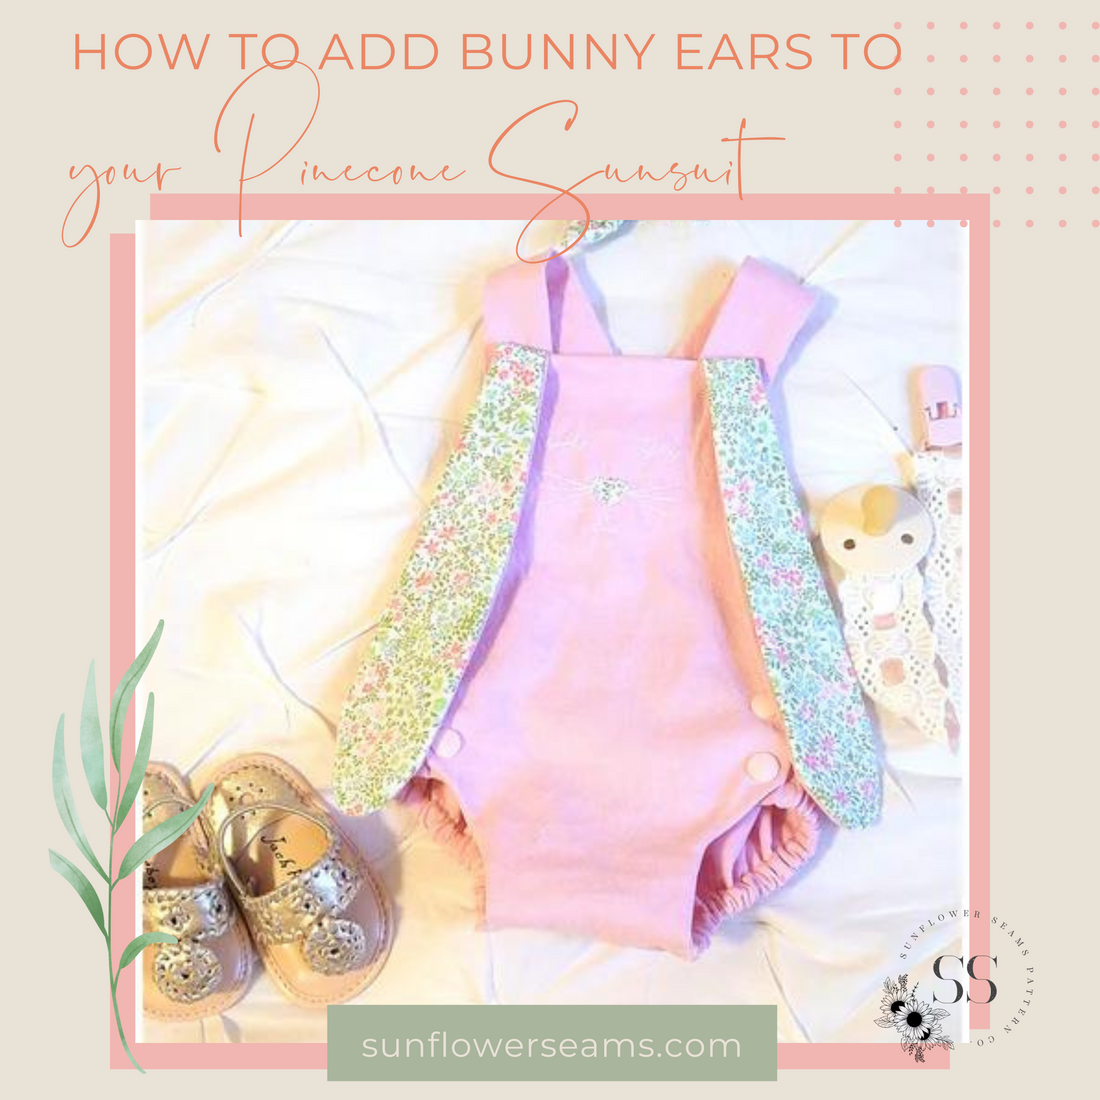 How to Add Bunny Ears to your Pinecone Sunsuit {A Tutorial}